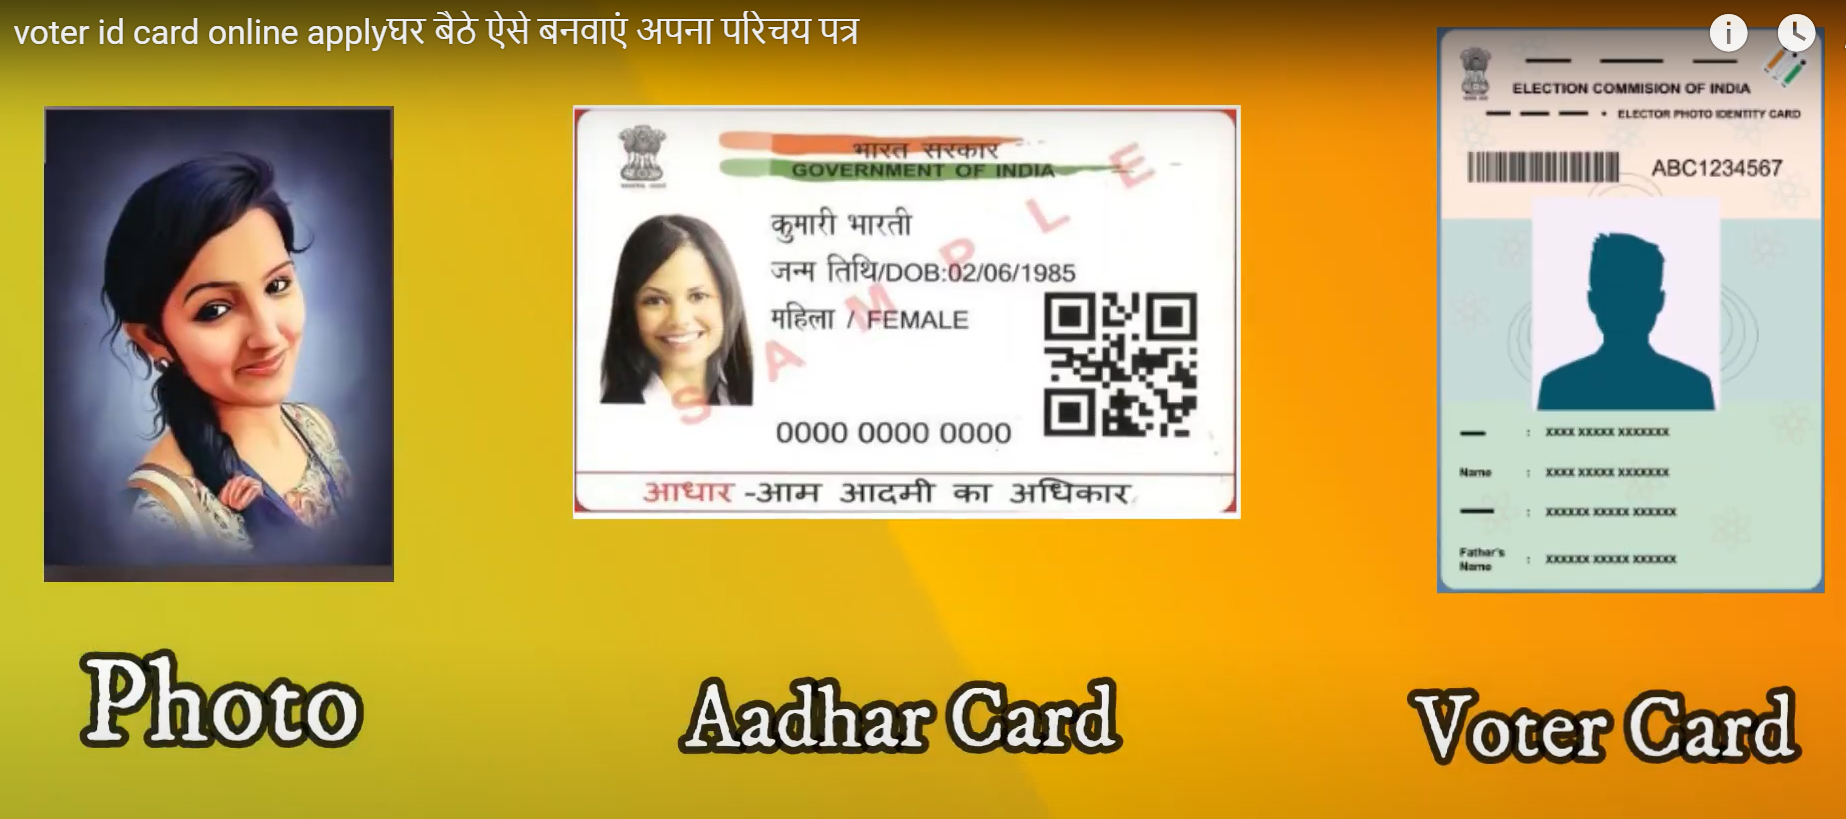 voter id card online-apply